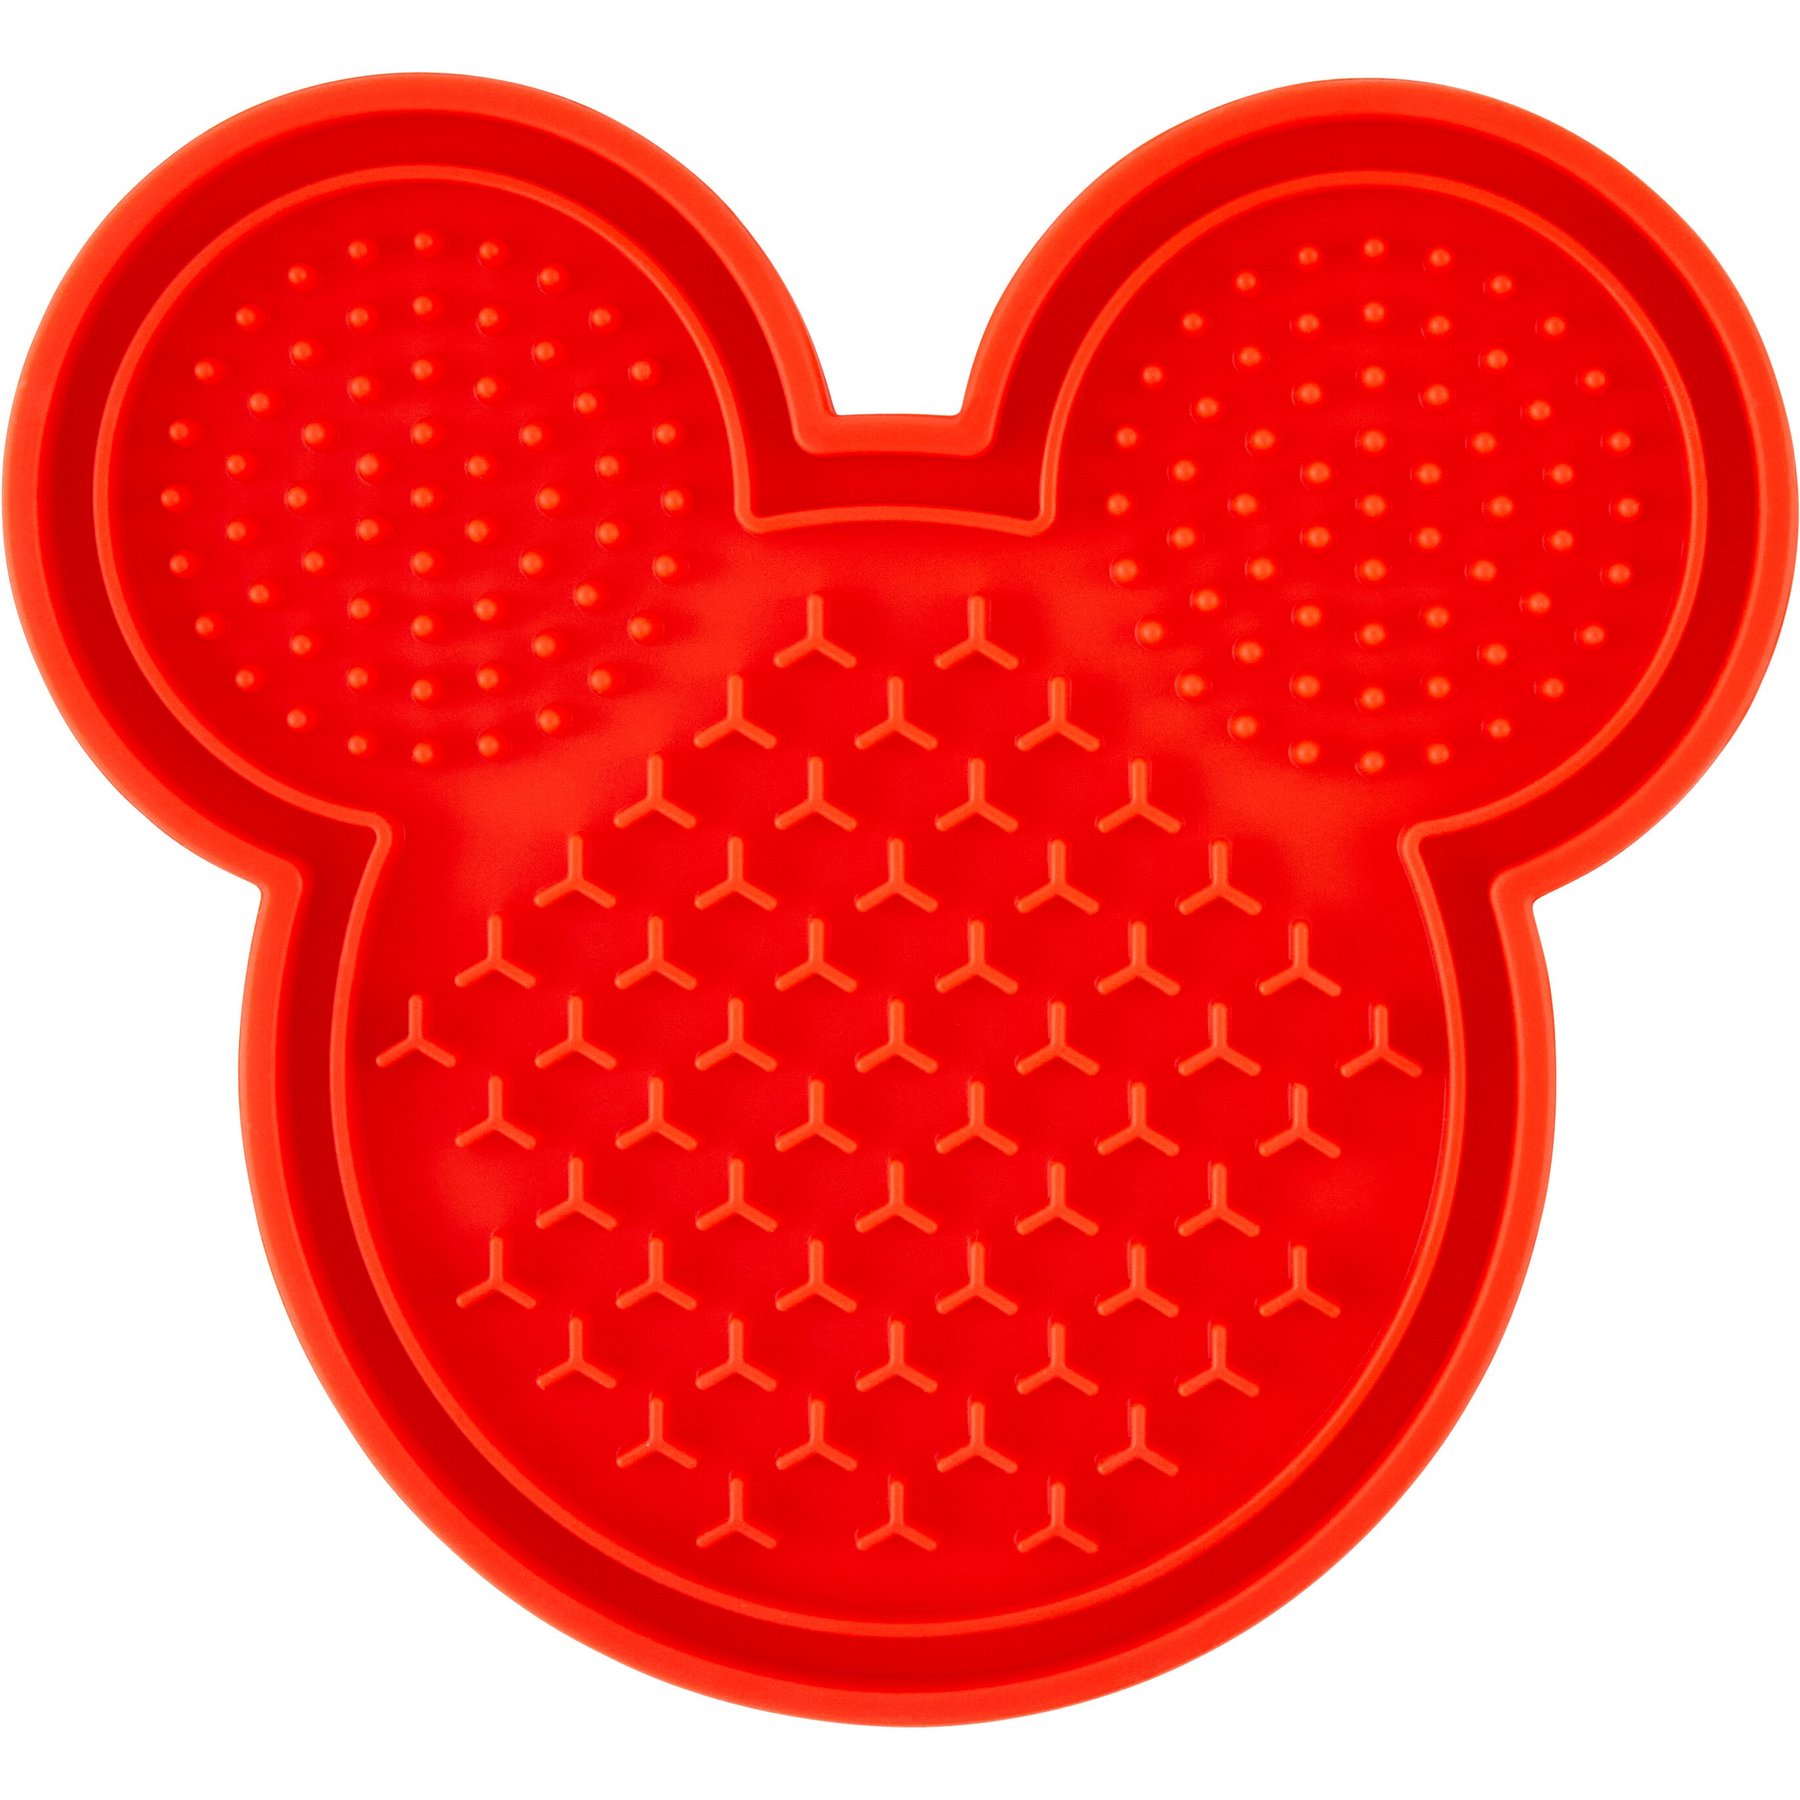 Disney Mickey Mouse Hands Dish Drying Mat with Rack